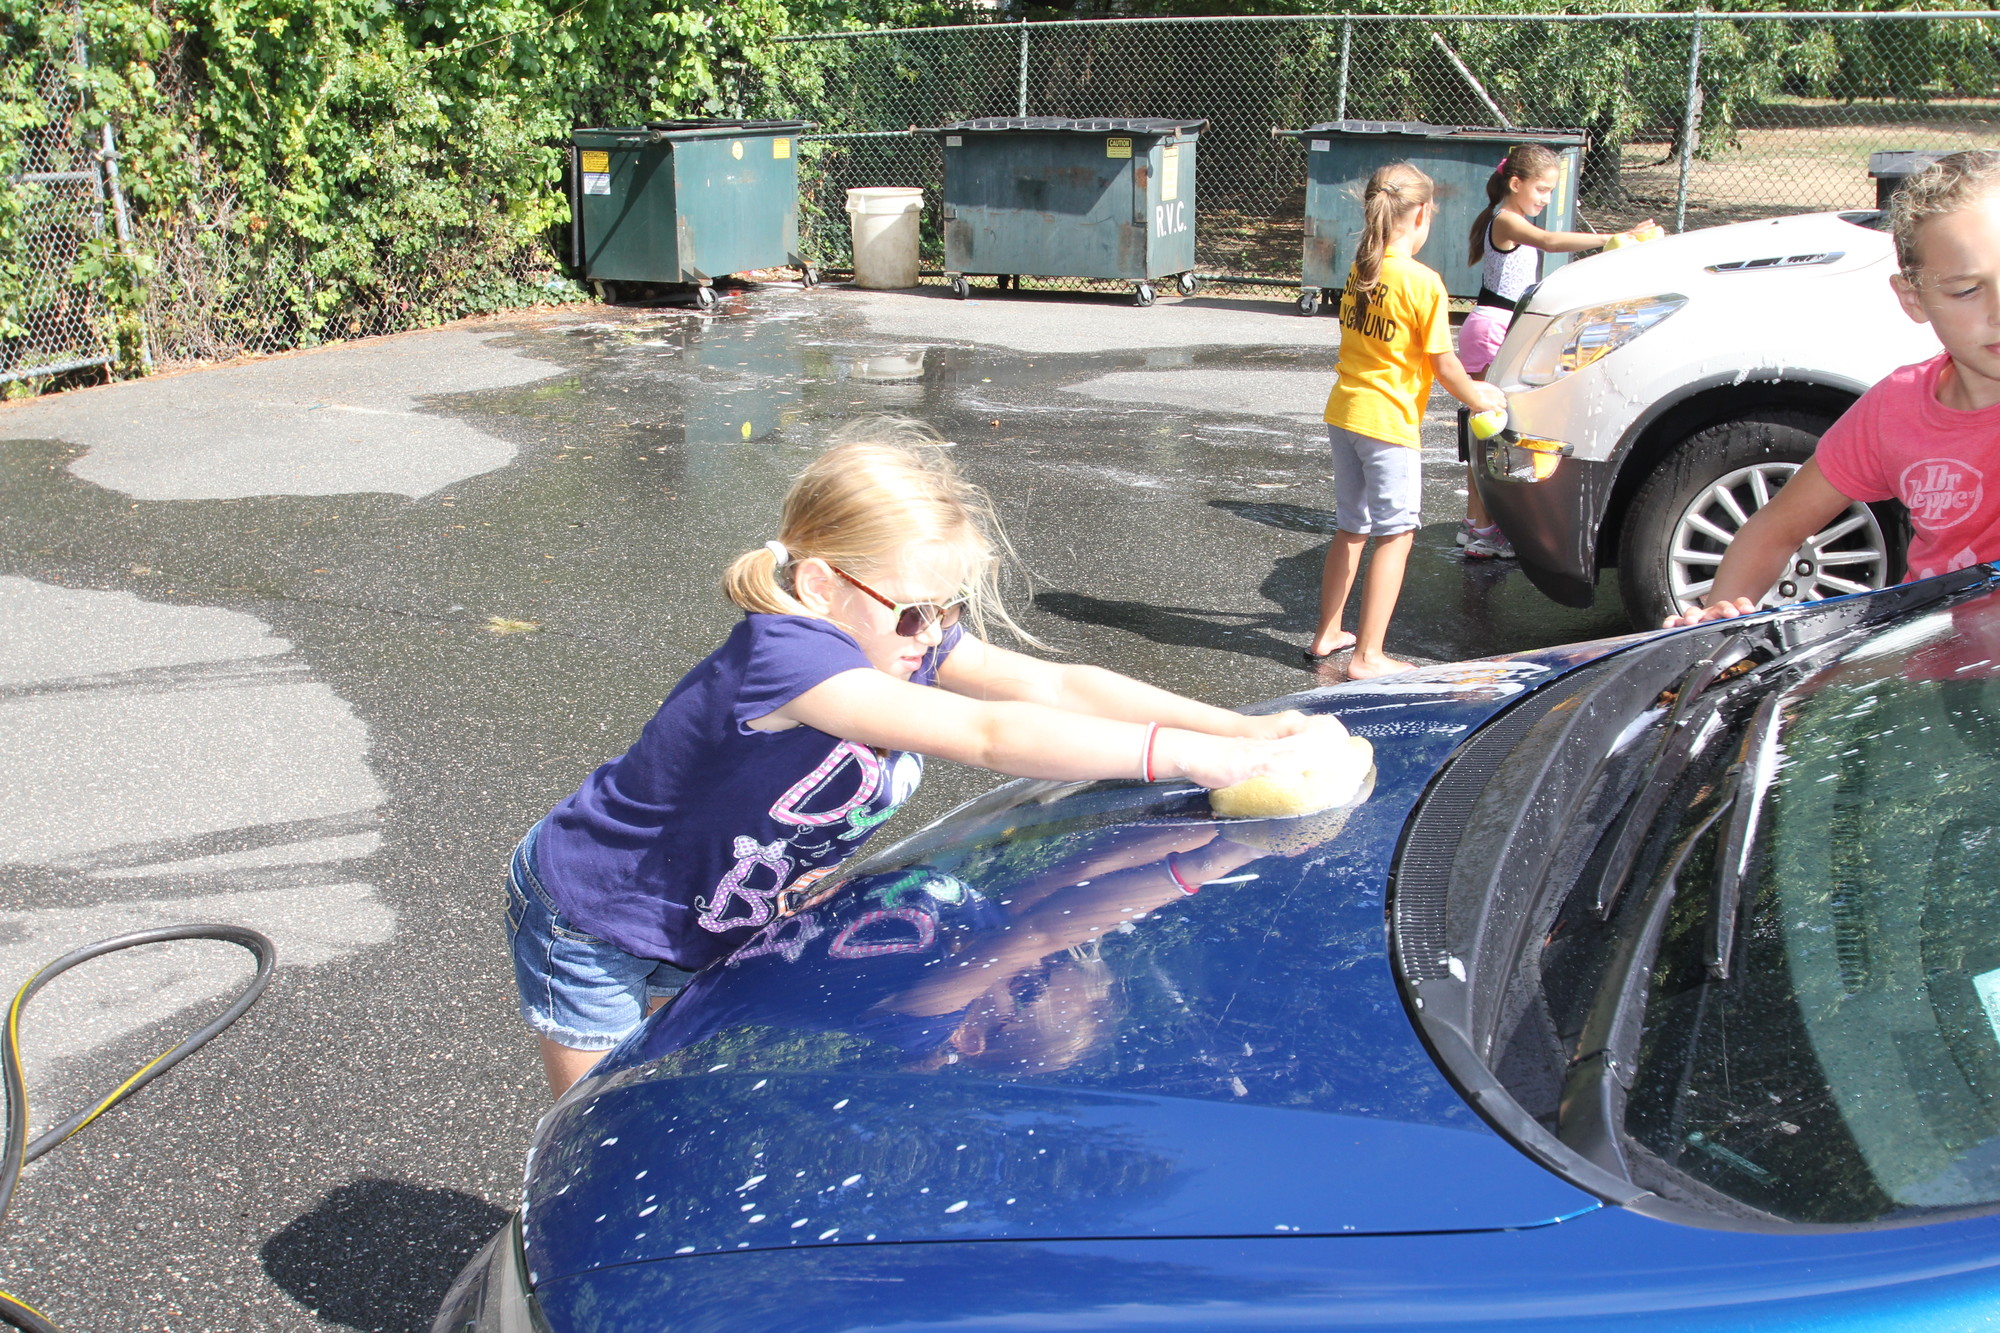 Gabriella sabatino cleaned tires and scrubbed down cars during the car wash.